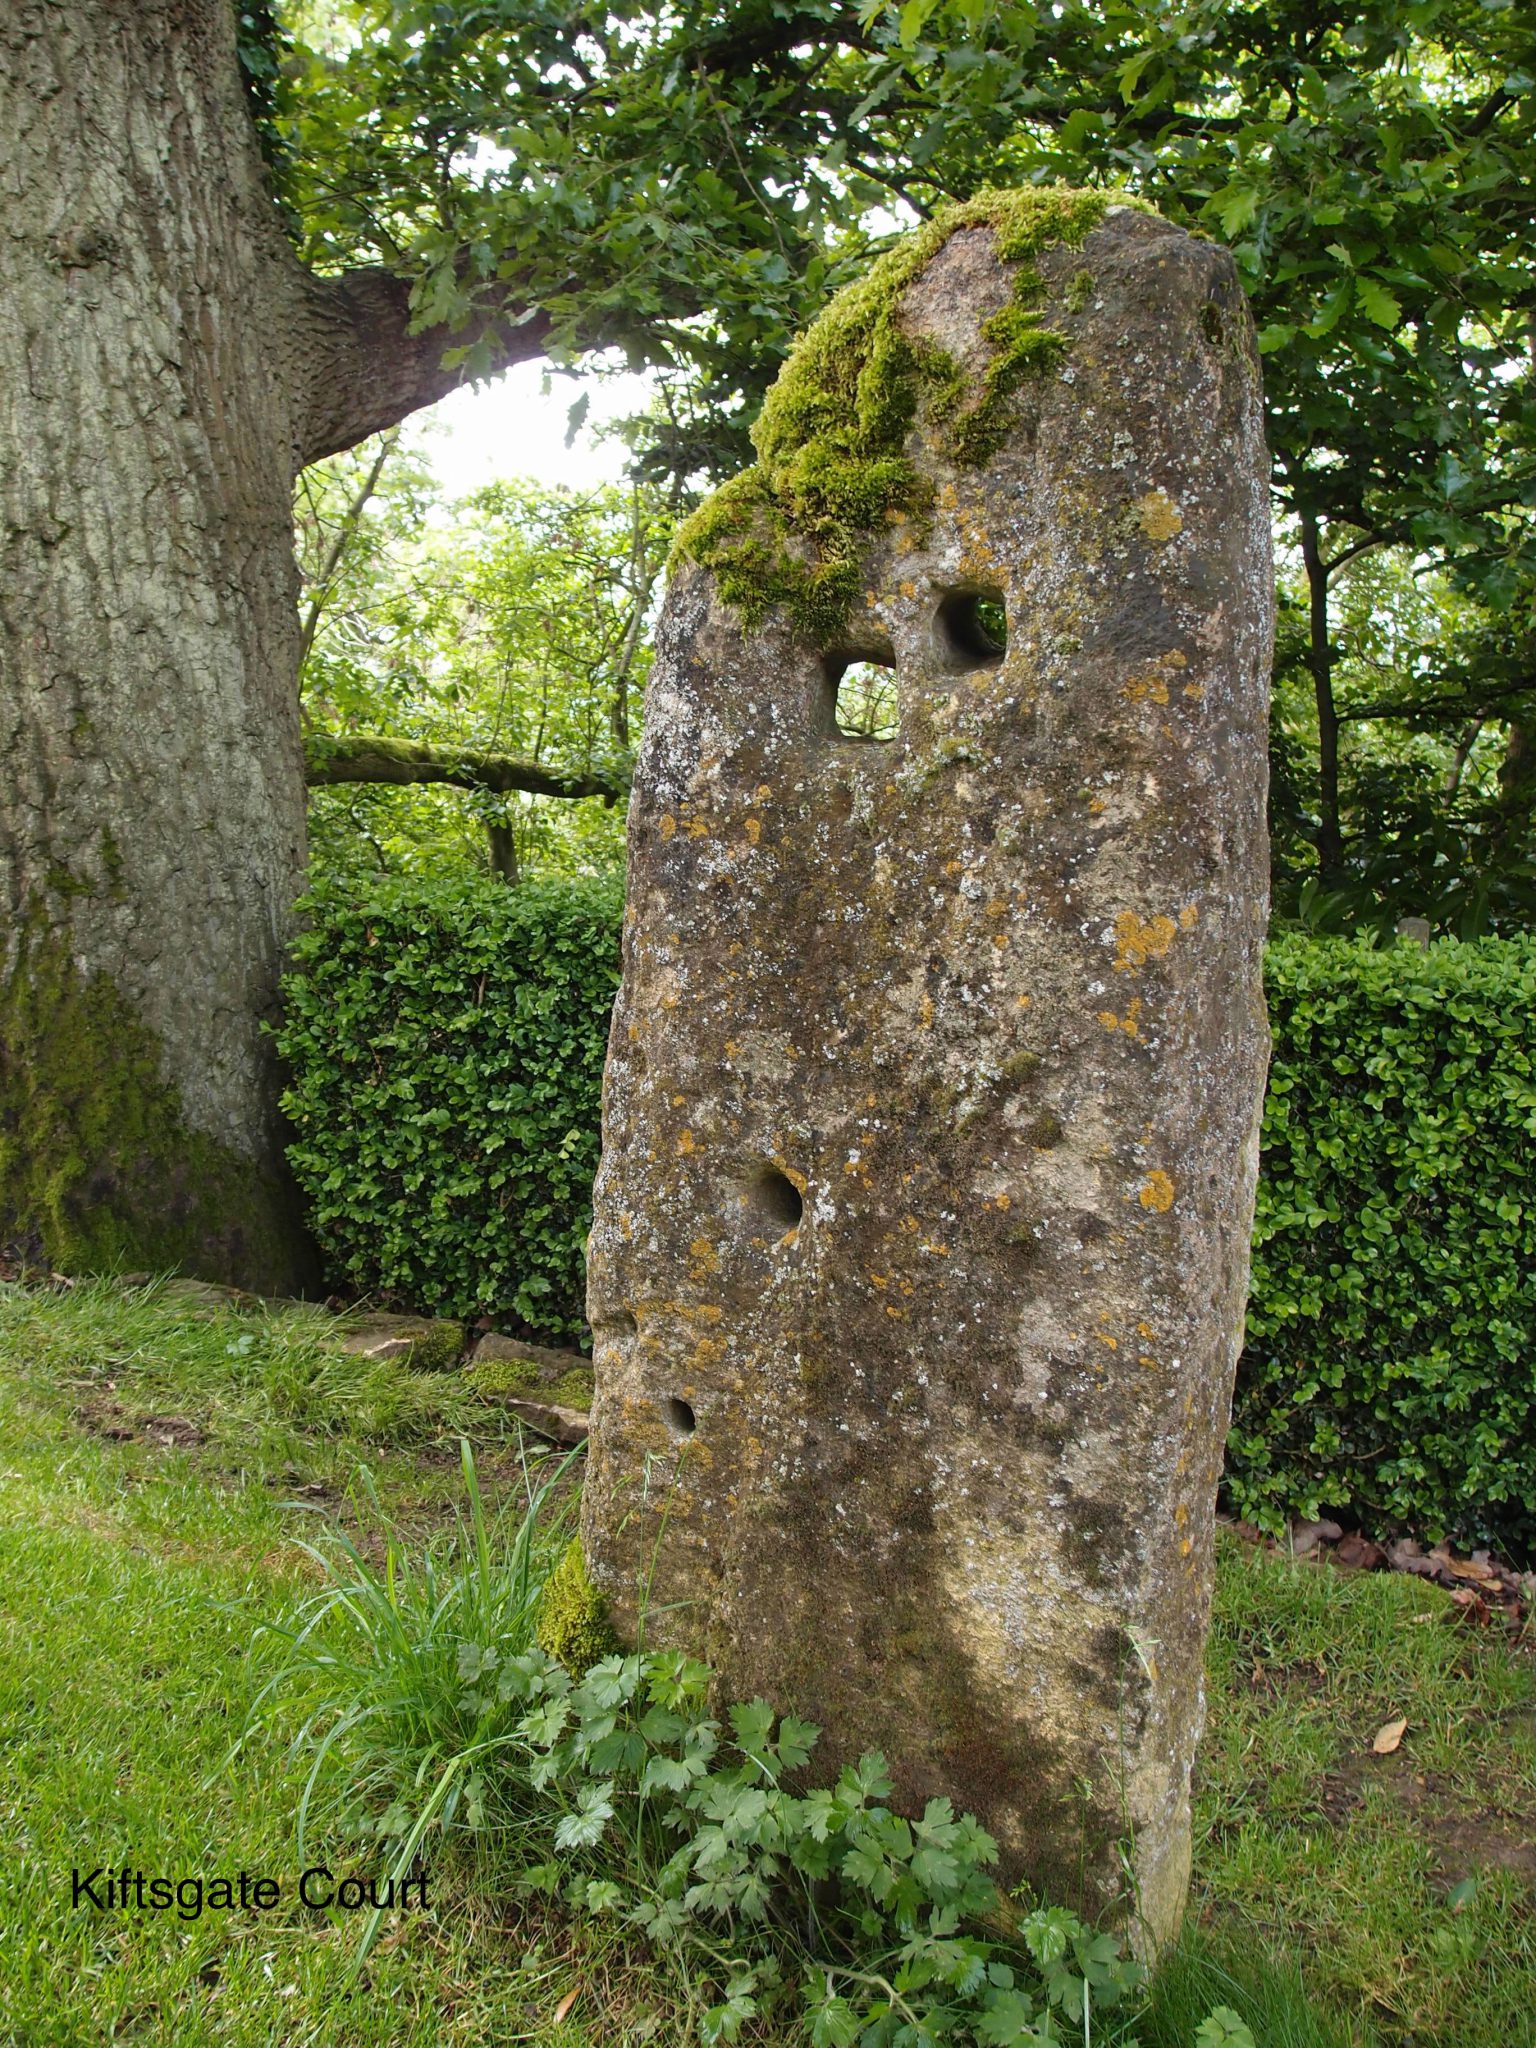 Near the Yellow Border, an old stone gatepost rescued from a nearby field has become a piece of sculpture.